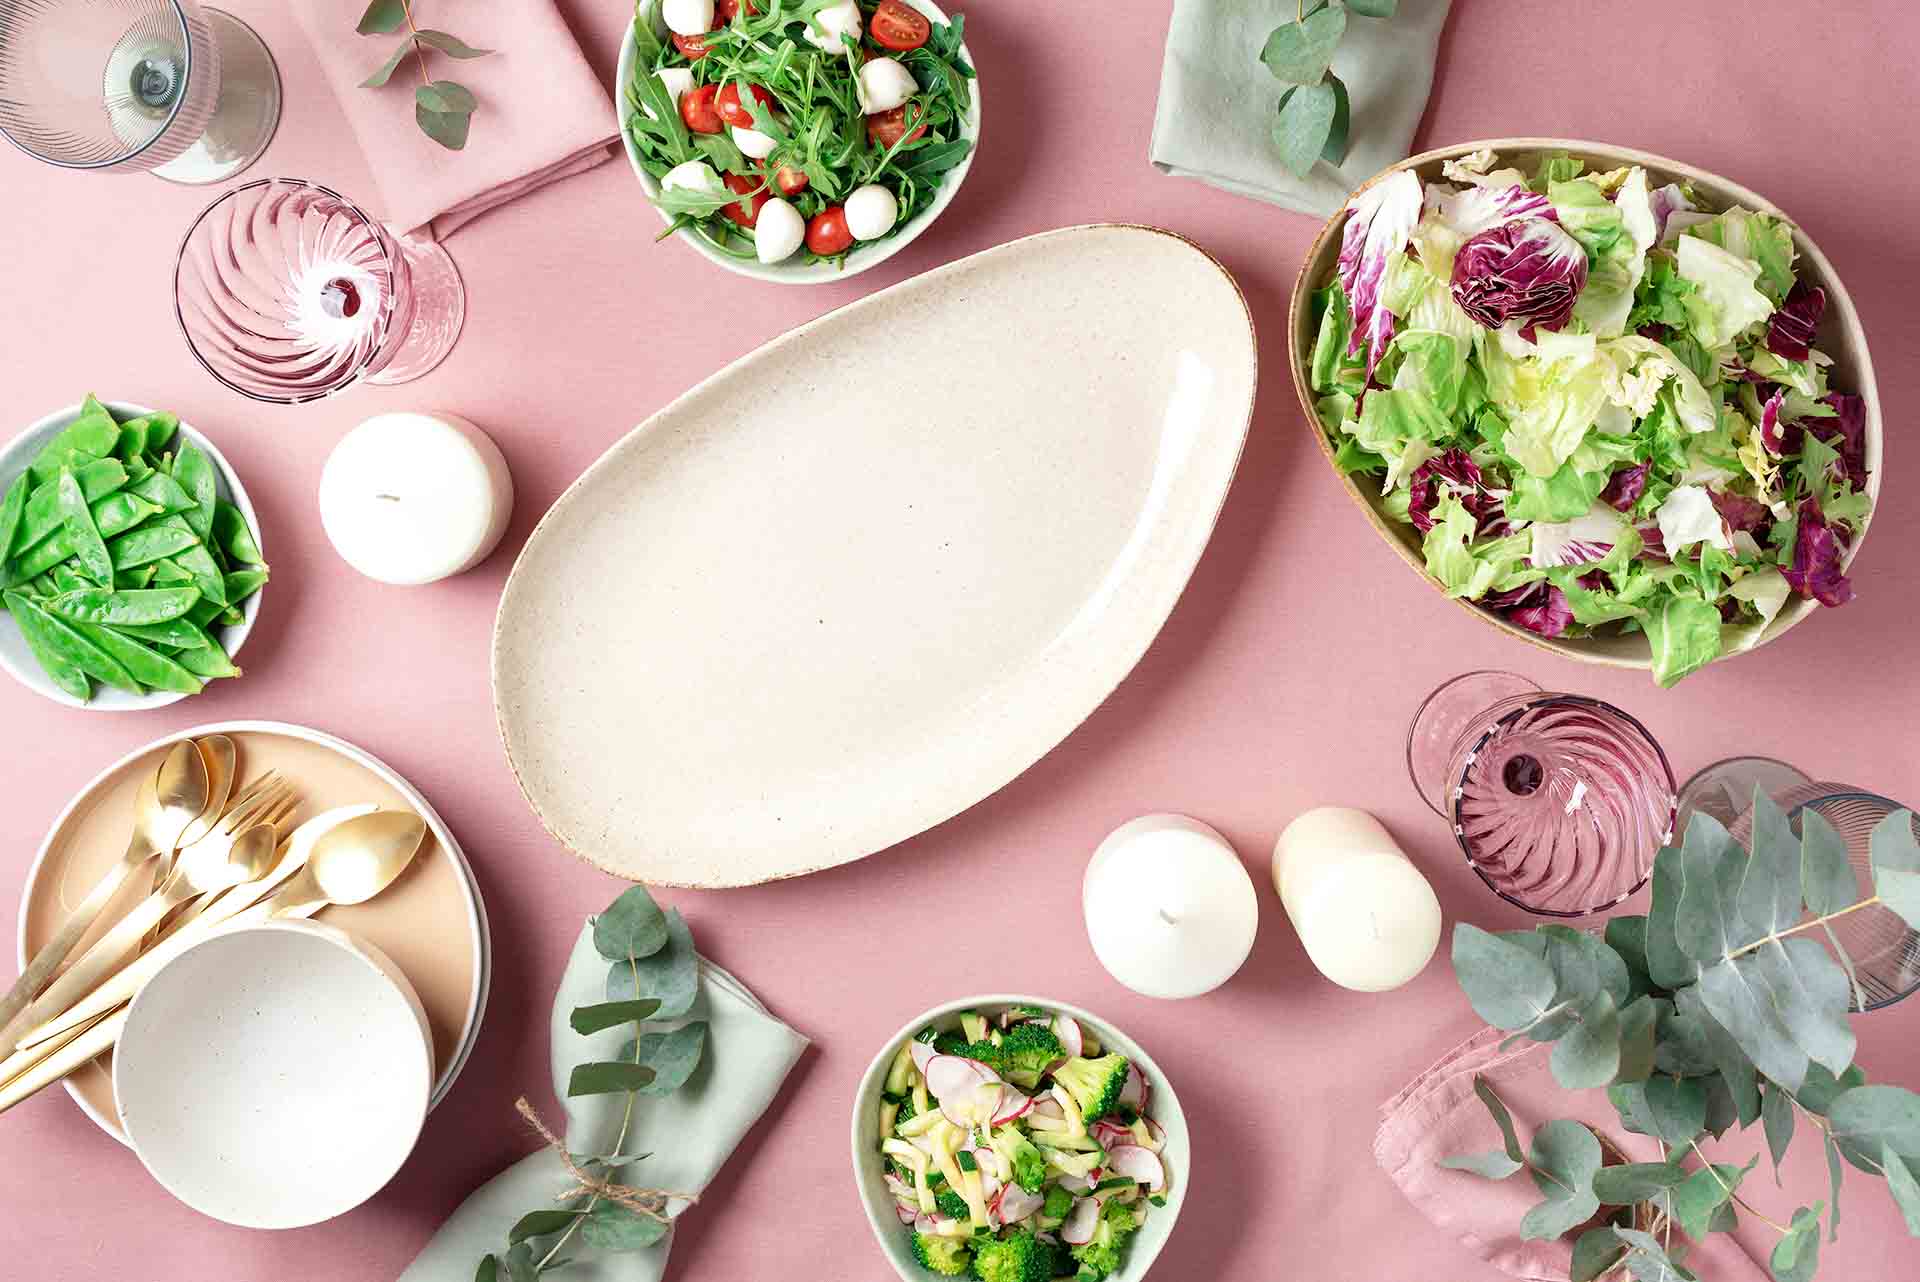 Serving plates, bowls with salads and vegetables dishes, eucalyptus flowers on pink shabby background.